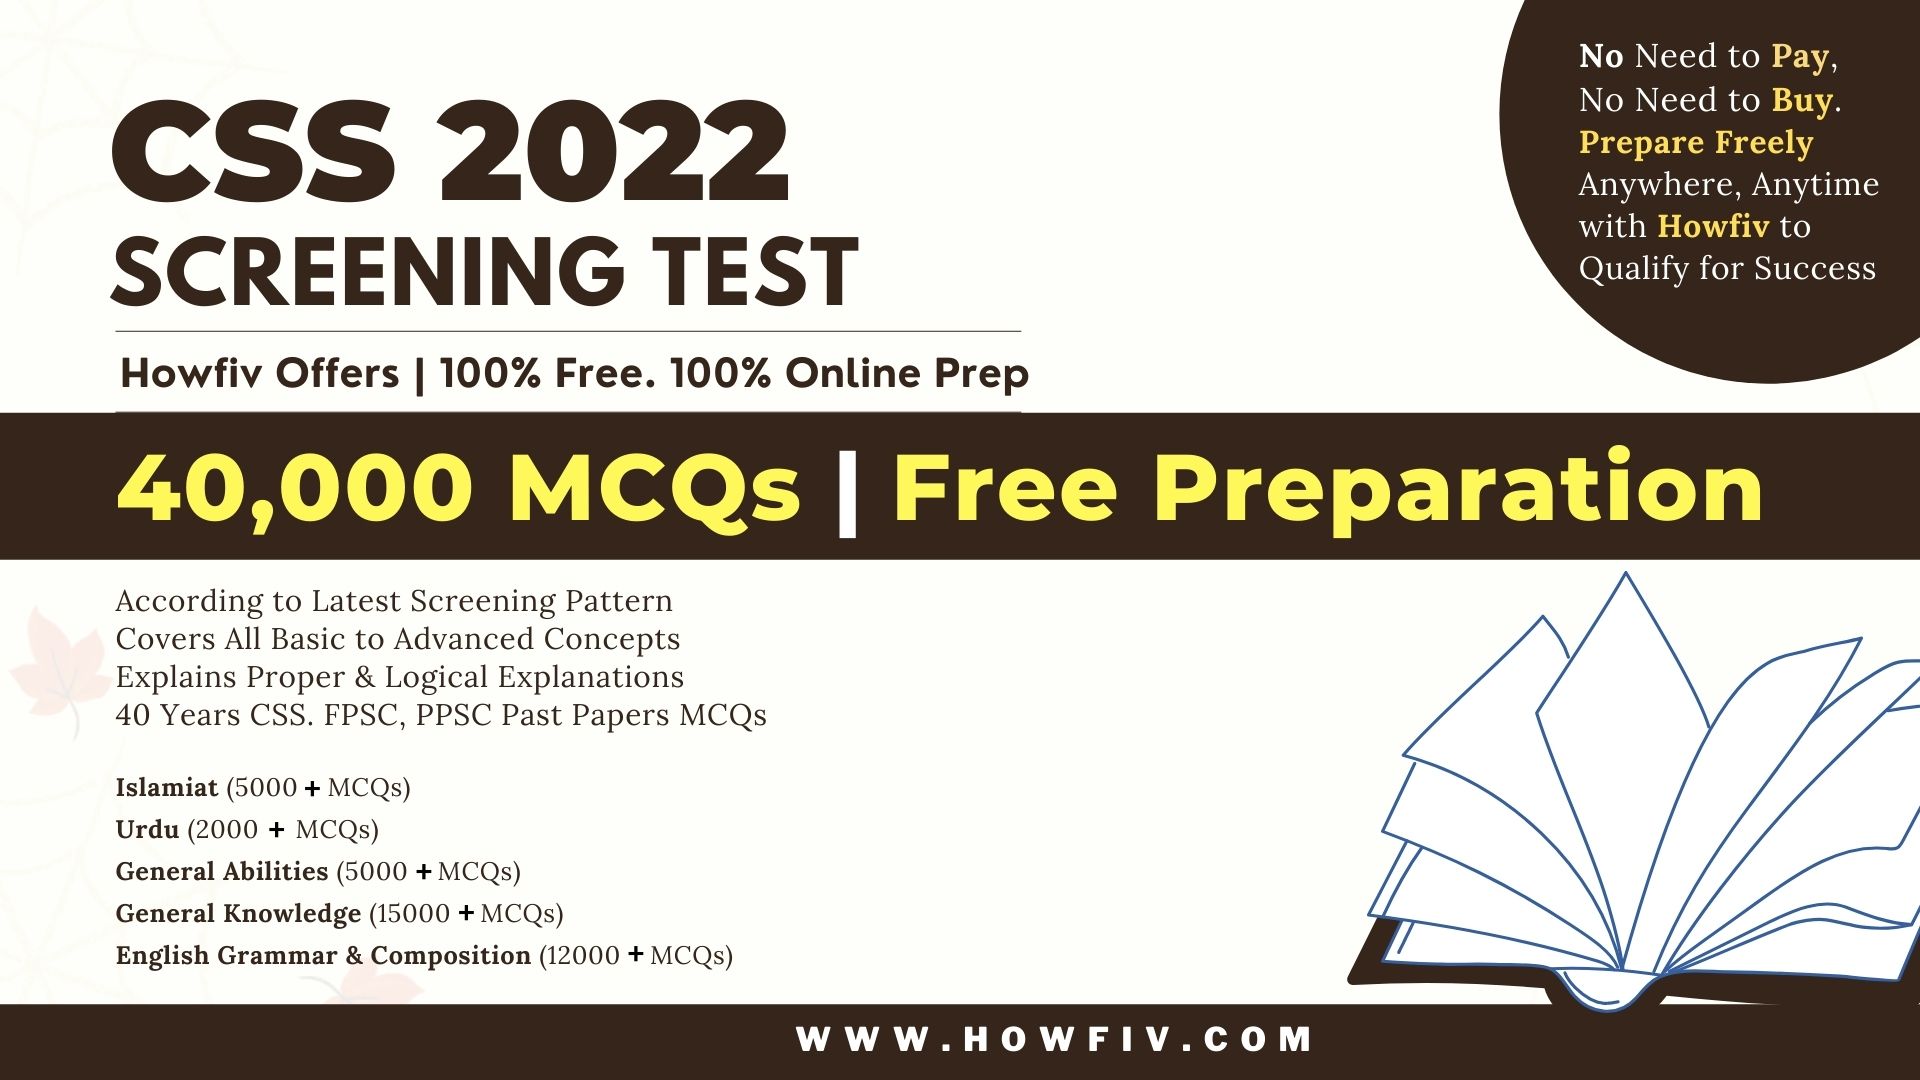 How to Prepare for CSS Screening Test? Free CSS Screening Test (MPT) Preparation